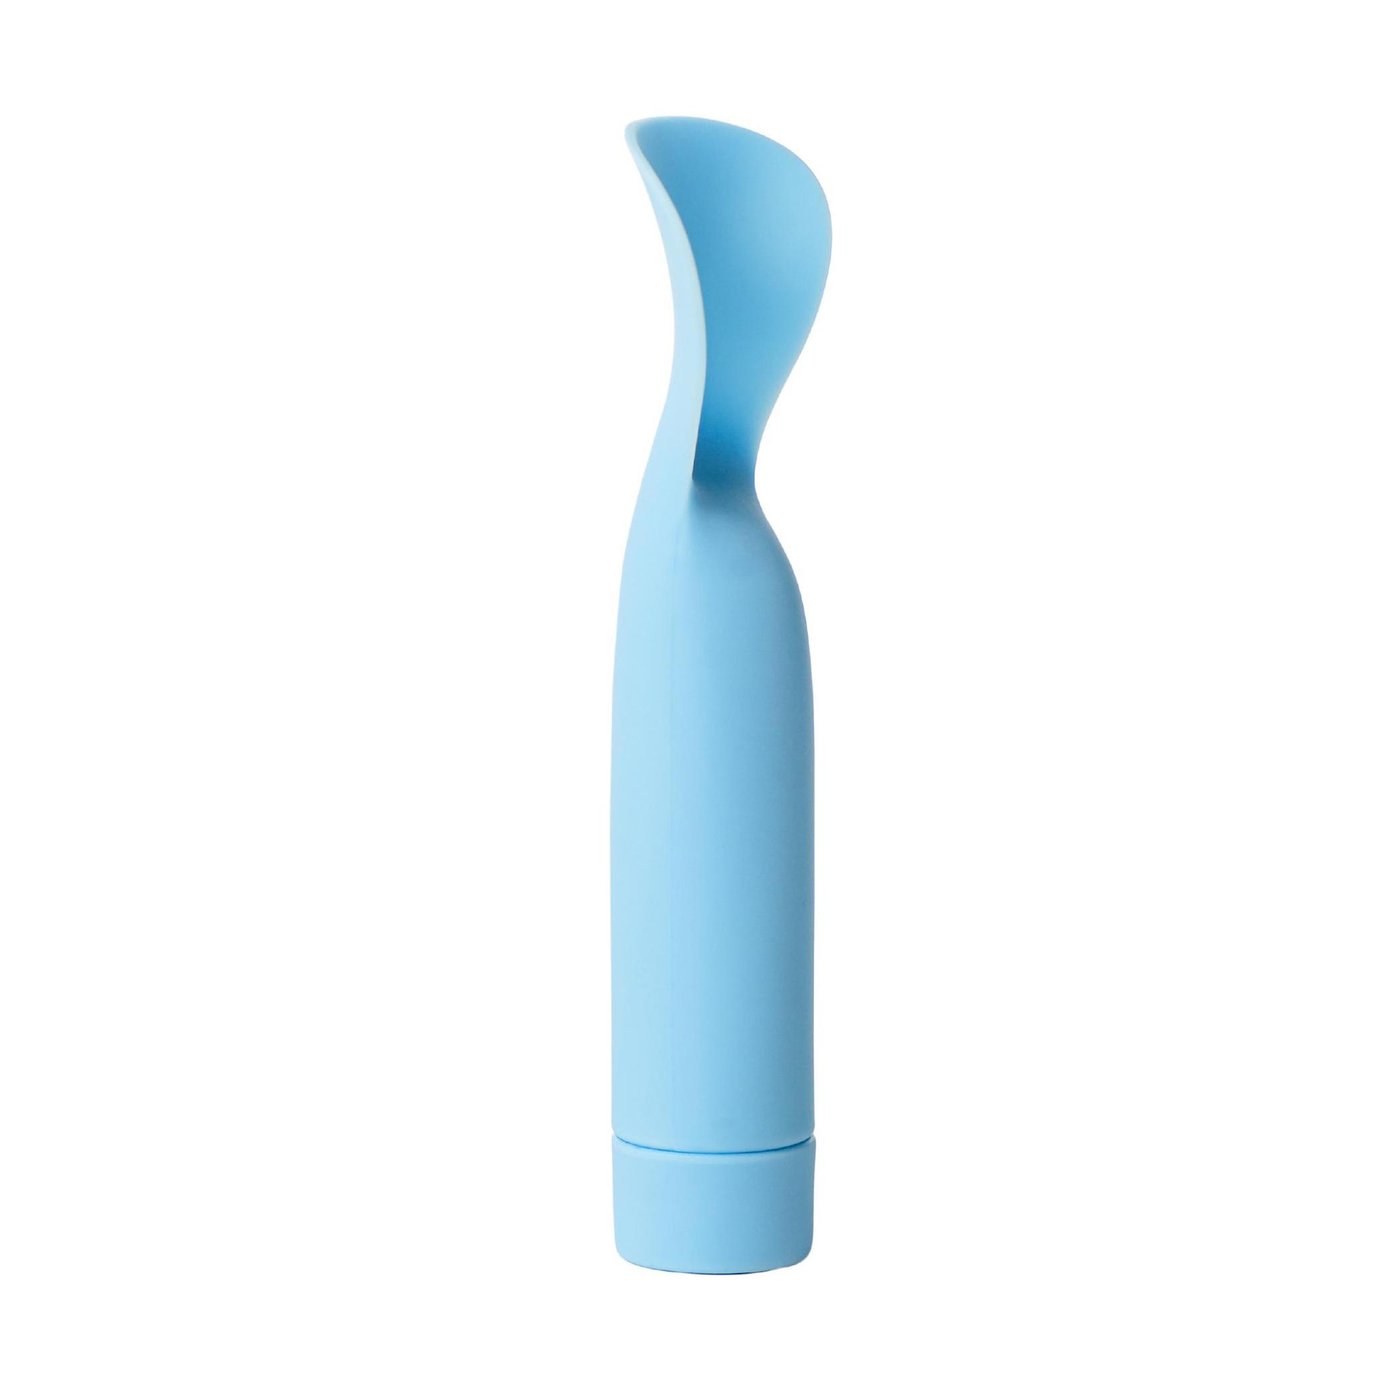 Makers The Smile Lover Vibrator goop | French